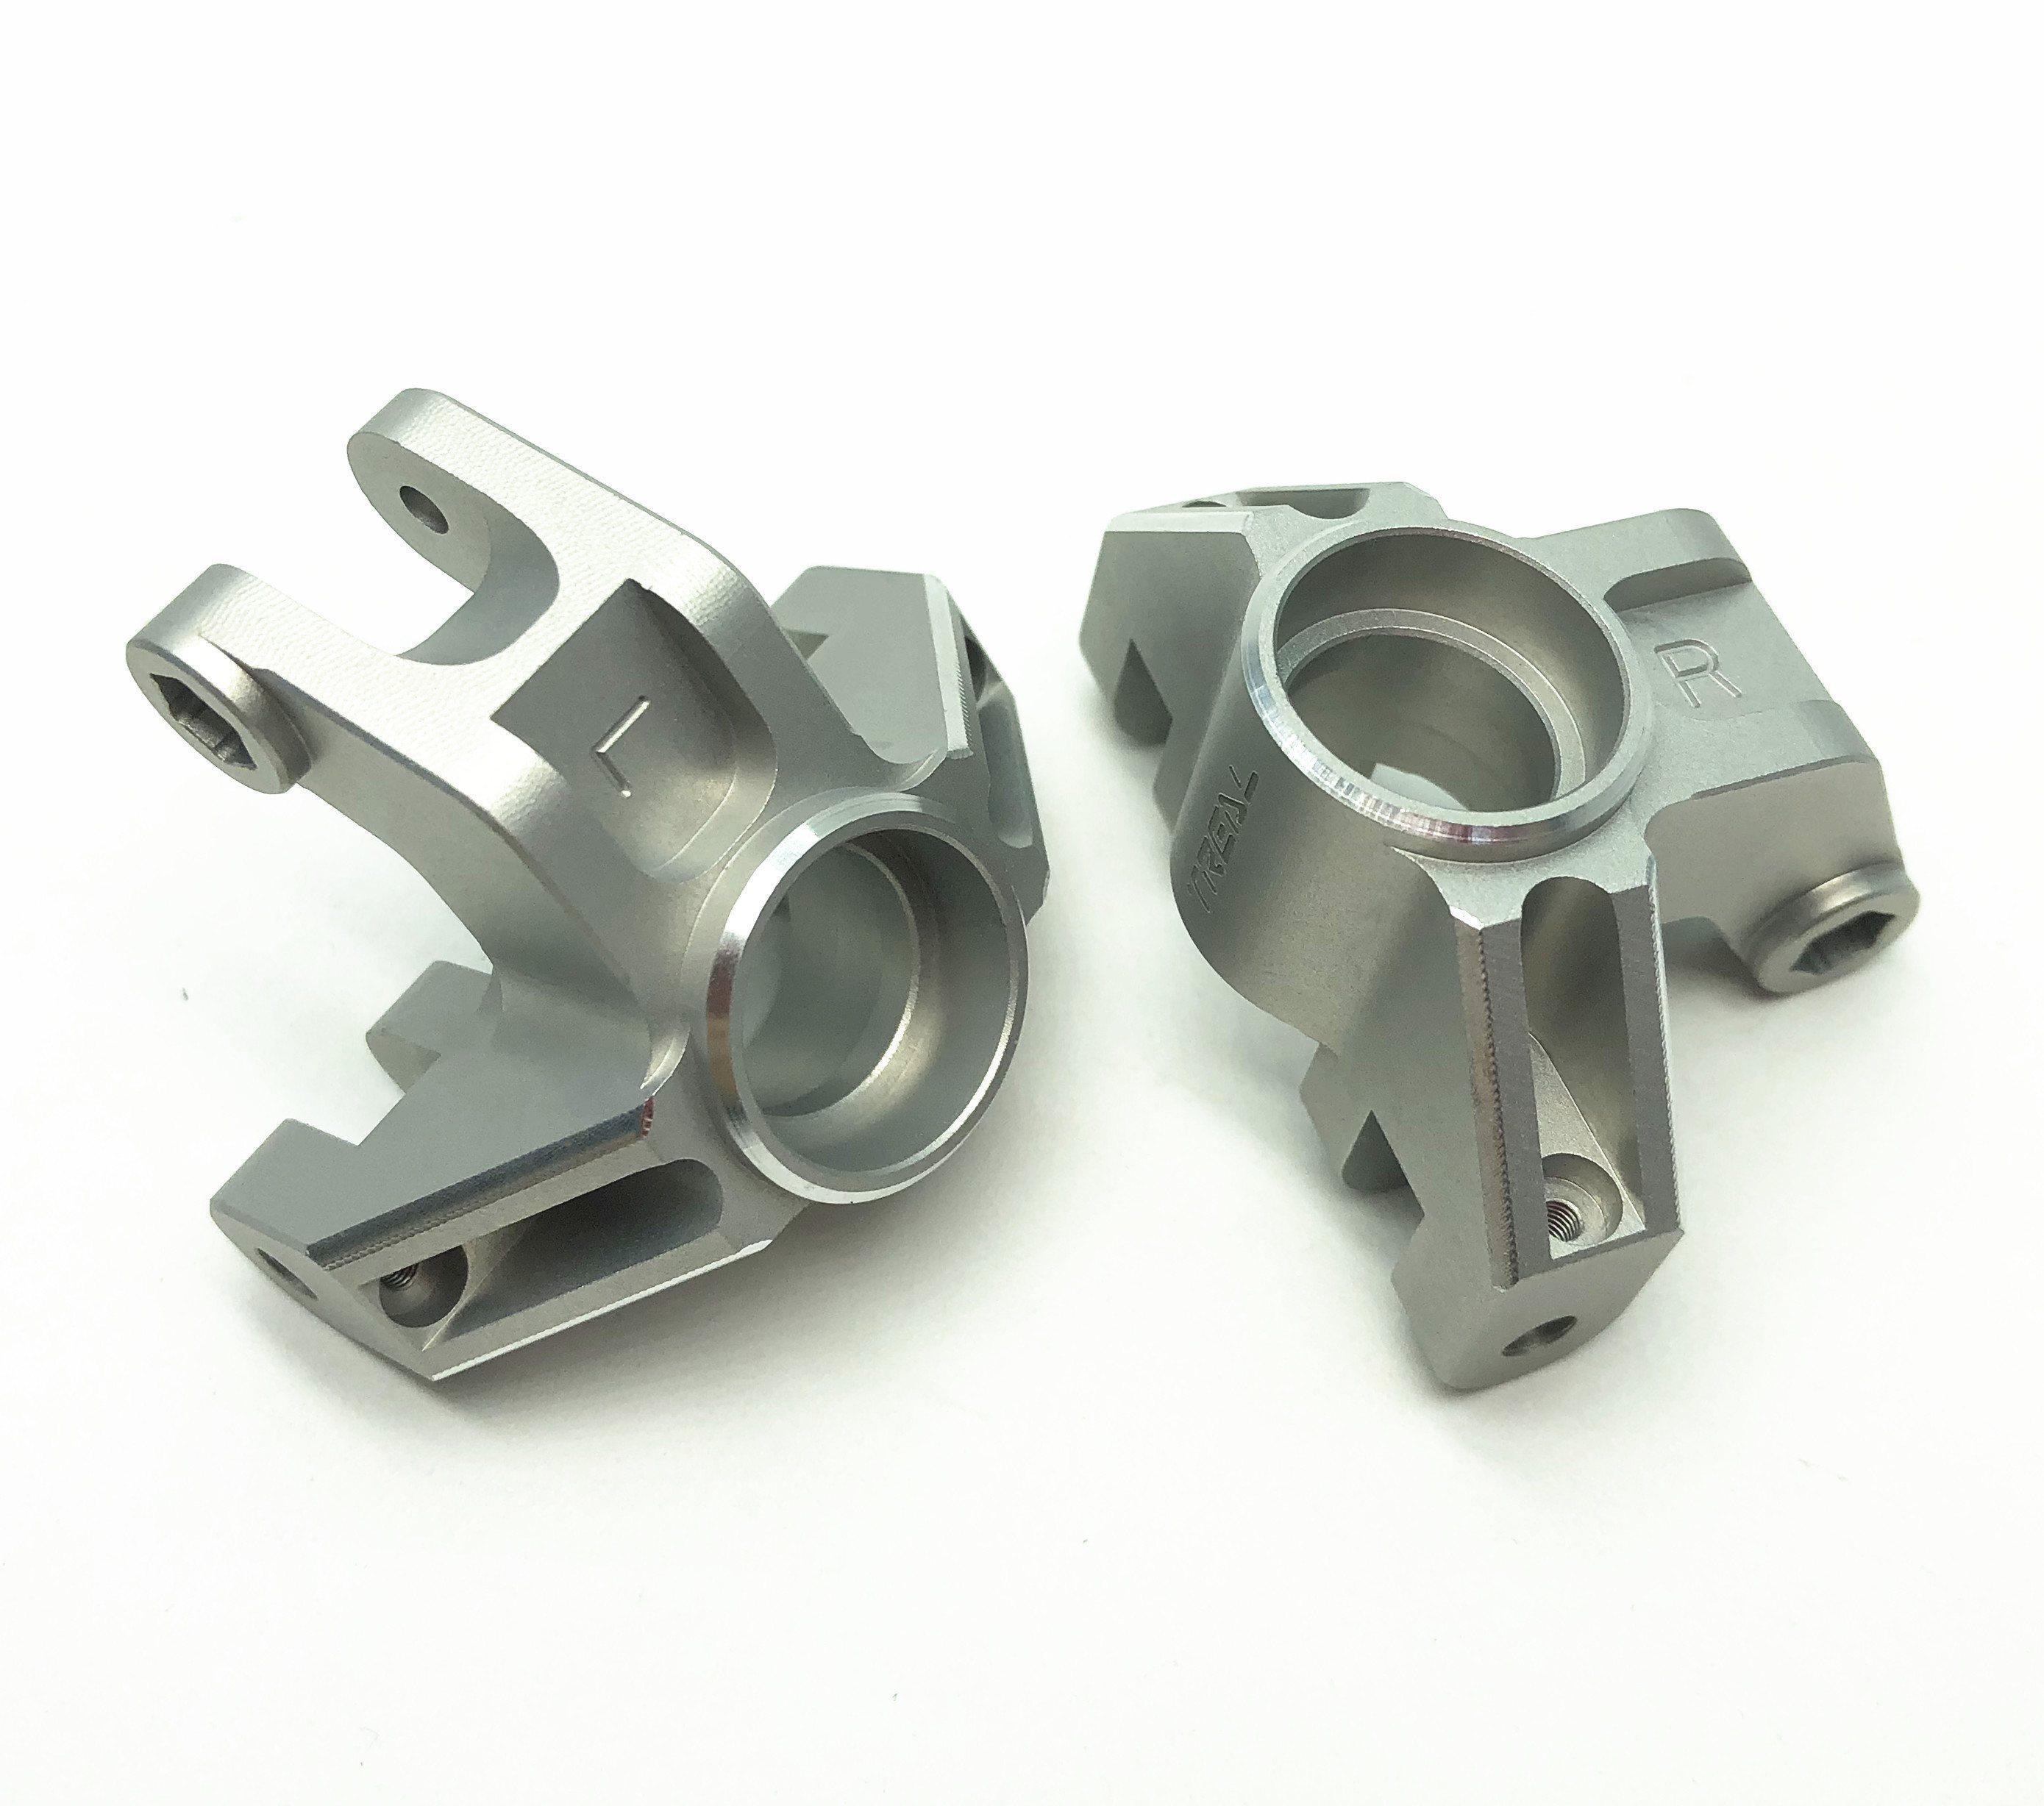 Treal Aluminum 7075 Front Steering Knuckels for Losi LMT (Silver) ...